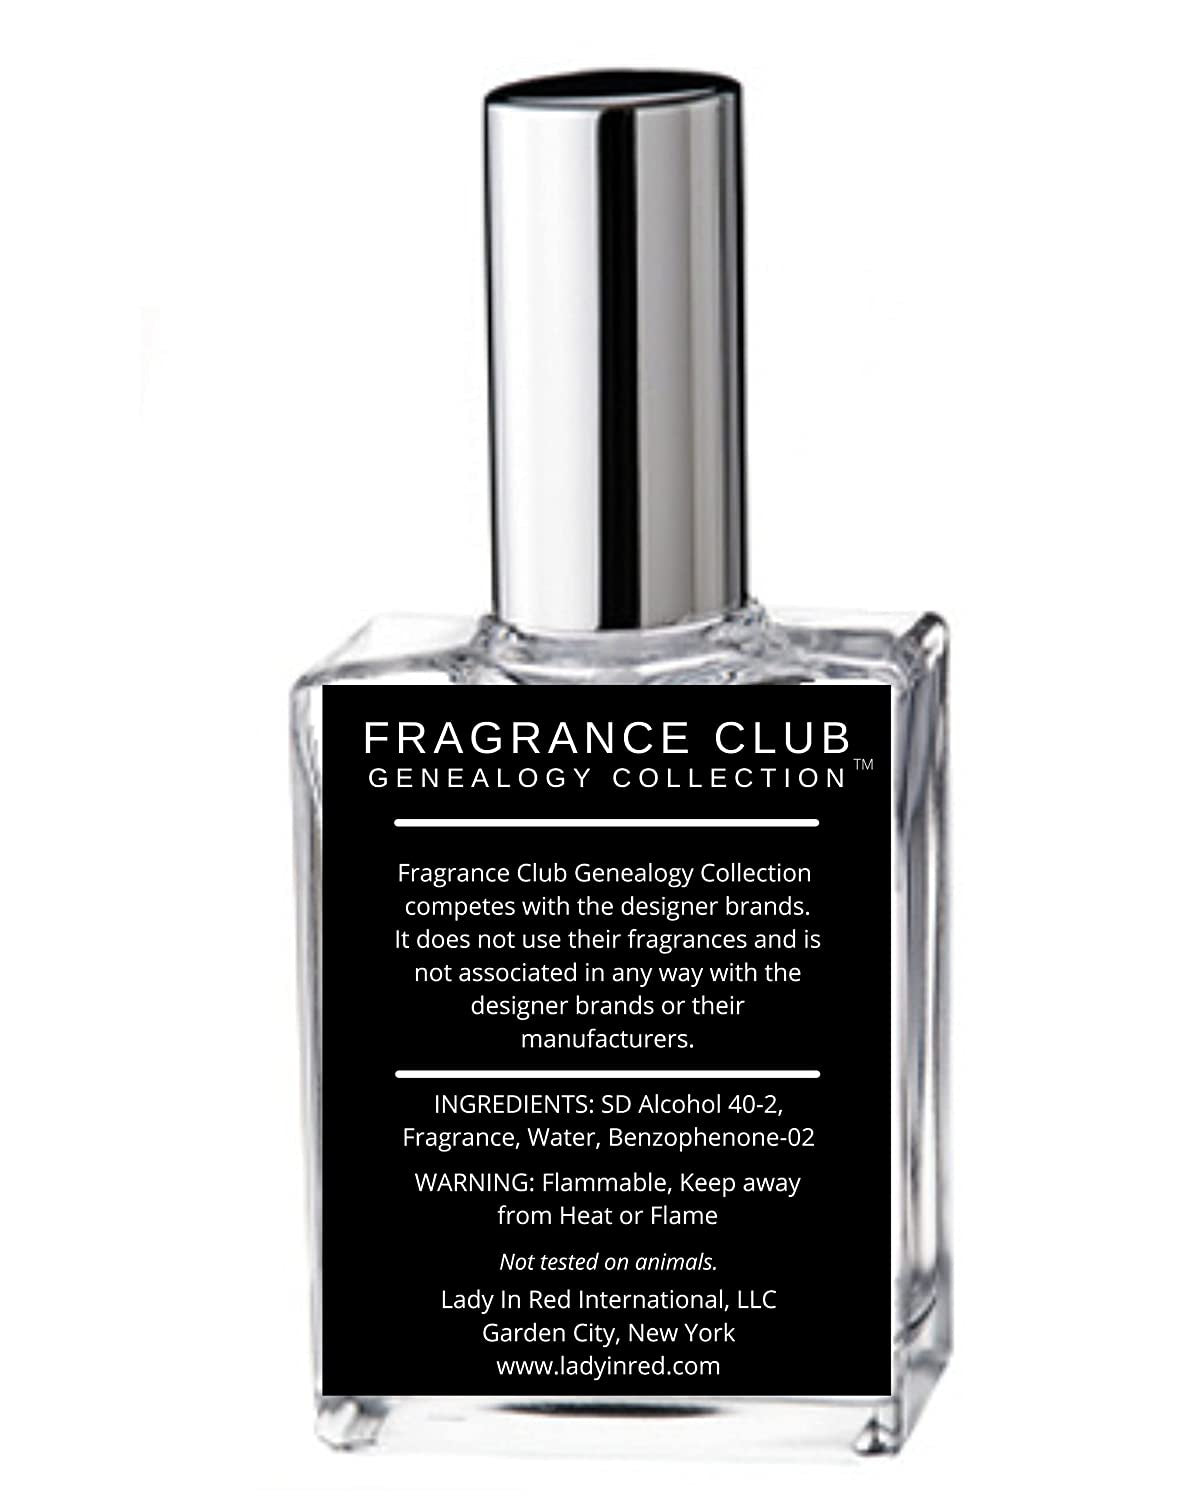 Fragrance Club Genealogy Collection Inspired by Aventus for Men, EDP 1.9 oz., Mens fragrance with Jasmine, Velvety Woods and Musk.